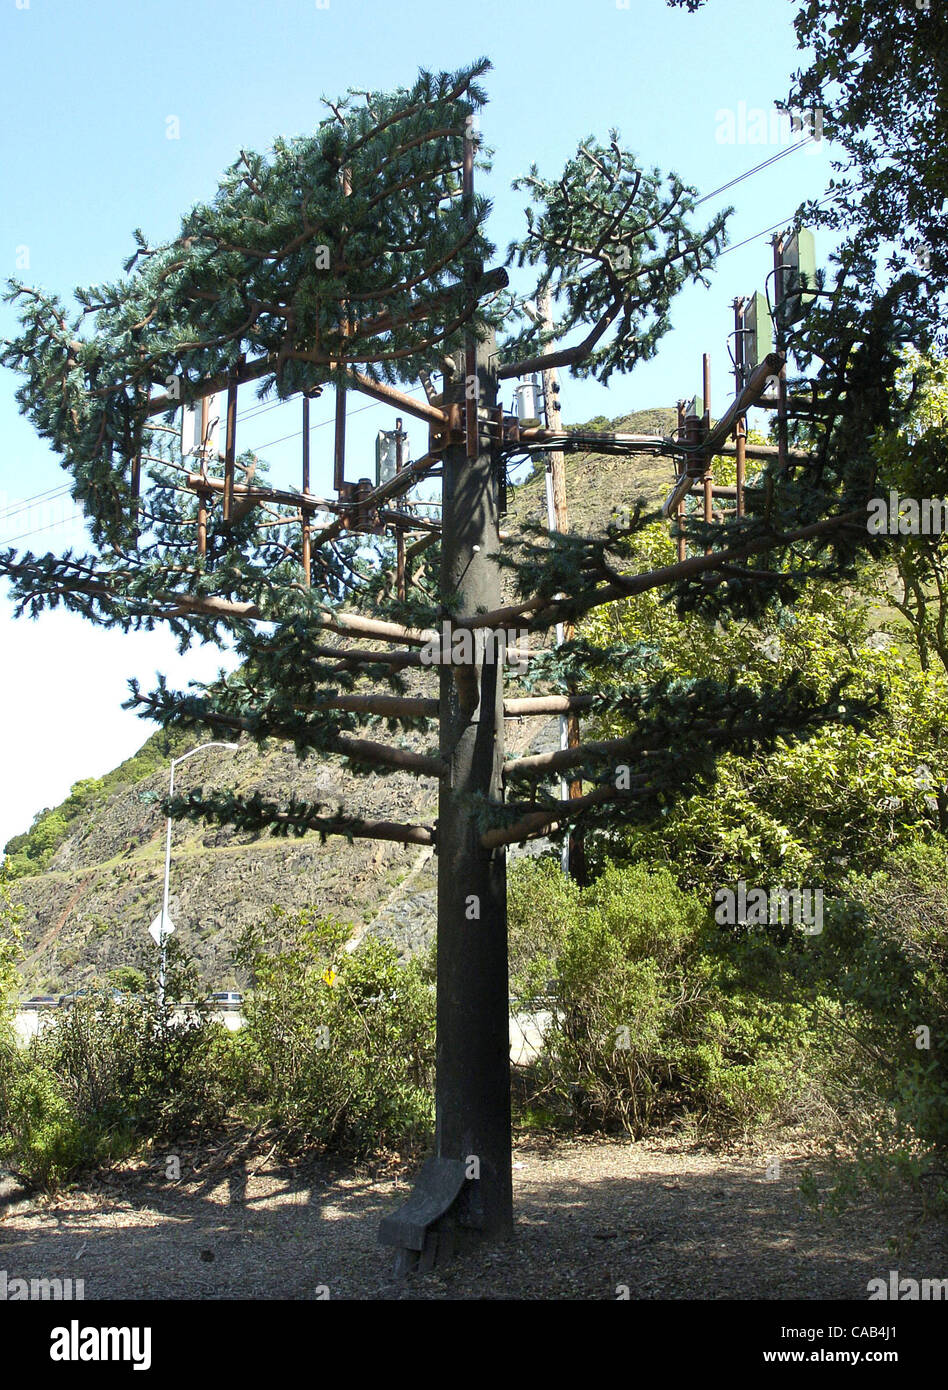 A large metal pole with artificial brances that looks like a tree is along side Highway 24 at Fish Ranch Road in Orinda Calif. The fake tree is used for cell phone reception. (DAN ROSENSTRAUCH/CONTRA COSTA TIMES) Stock Photo